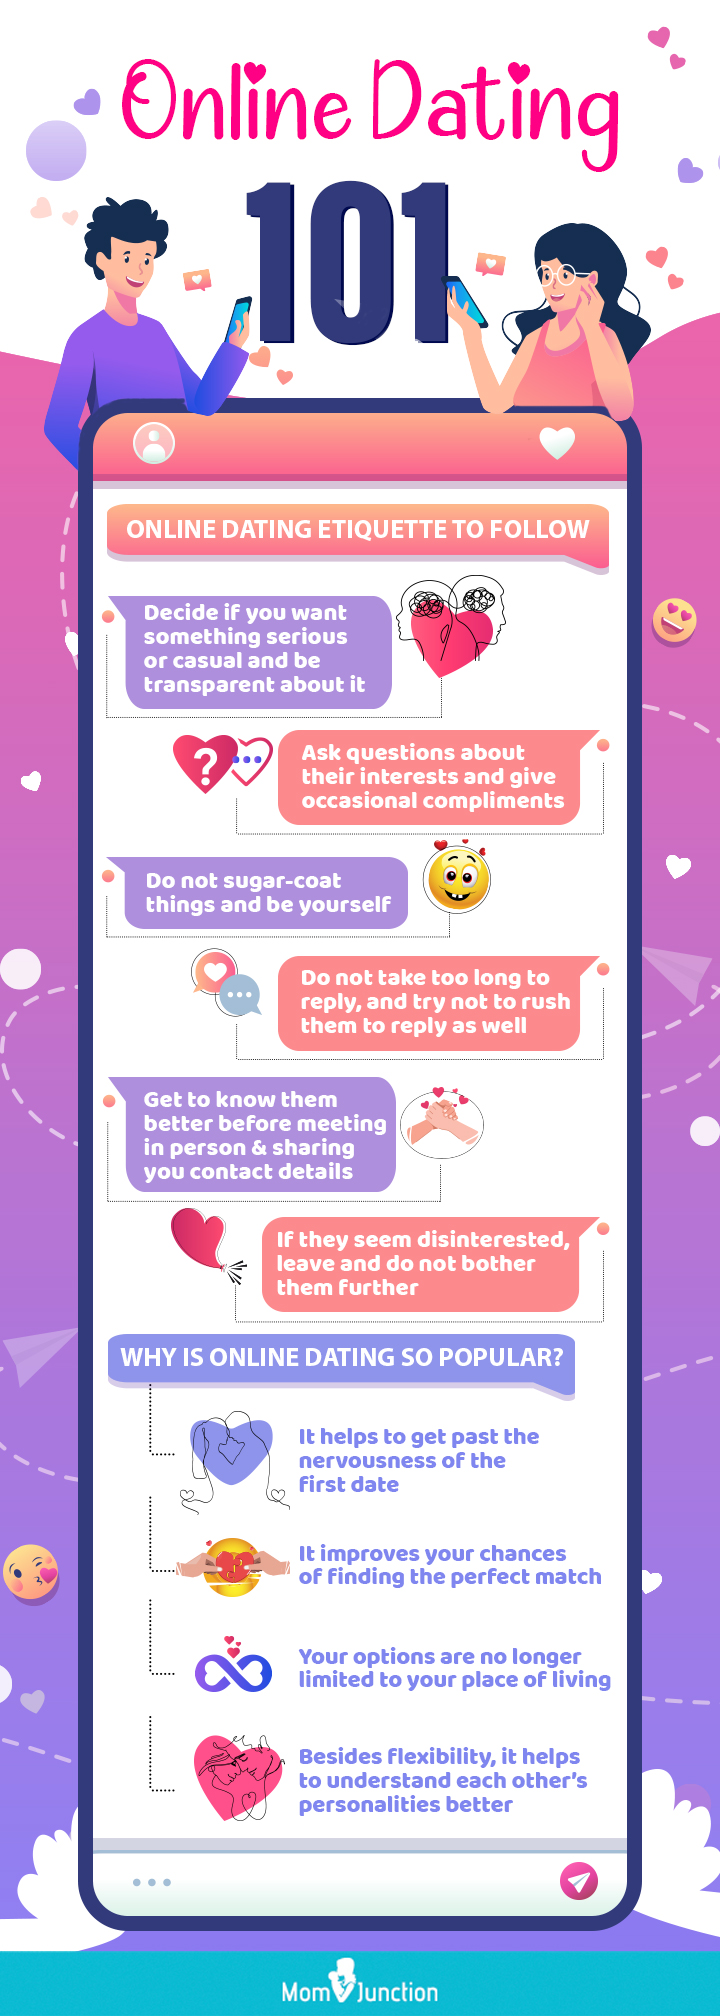 dating online: This Is What Professionals Do